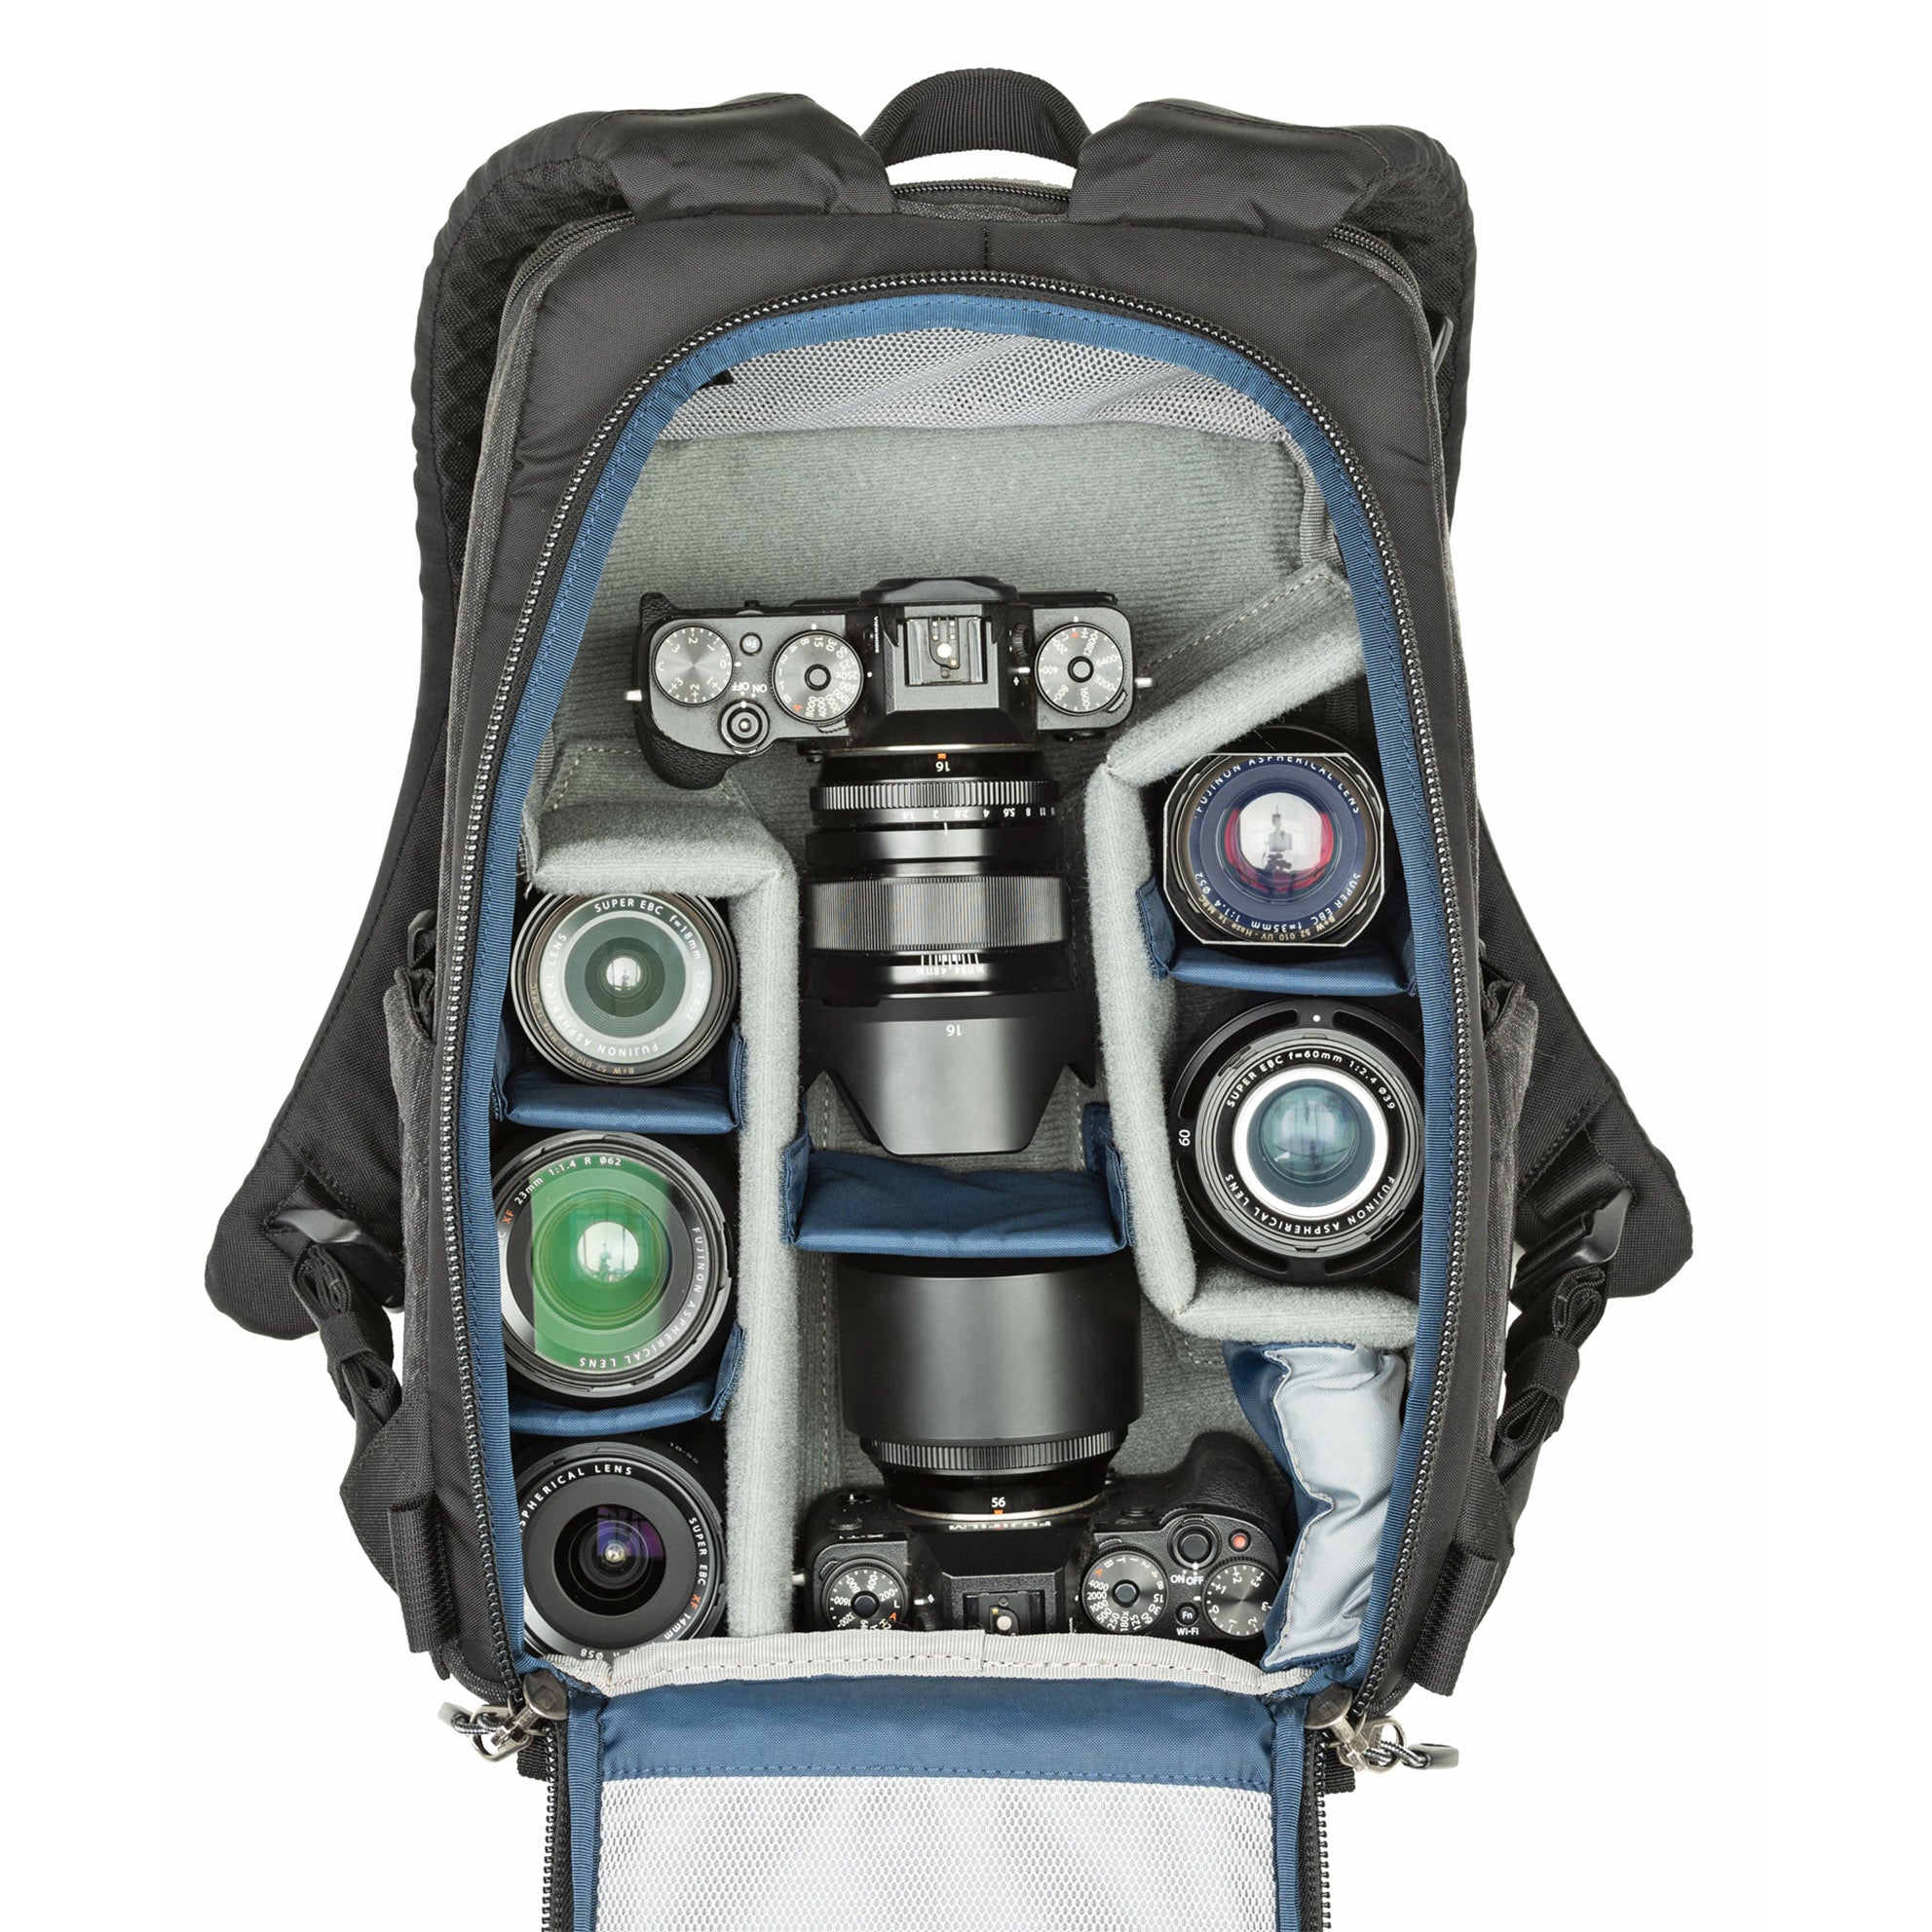 1–2 ungripped cameras with lens attached up to a 70–200mm f/2.8, 1–3 additional lenses, a strobe, a 13” laptop, plus personal gear